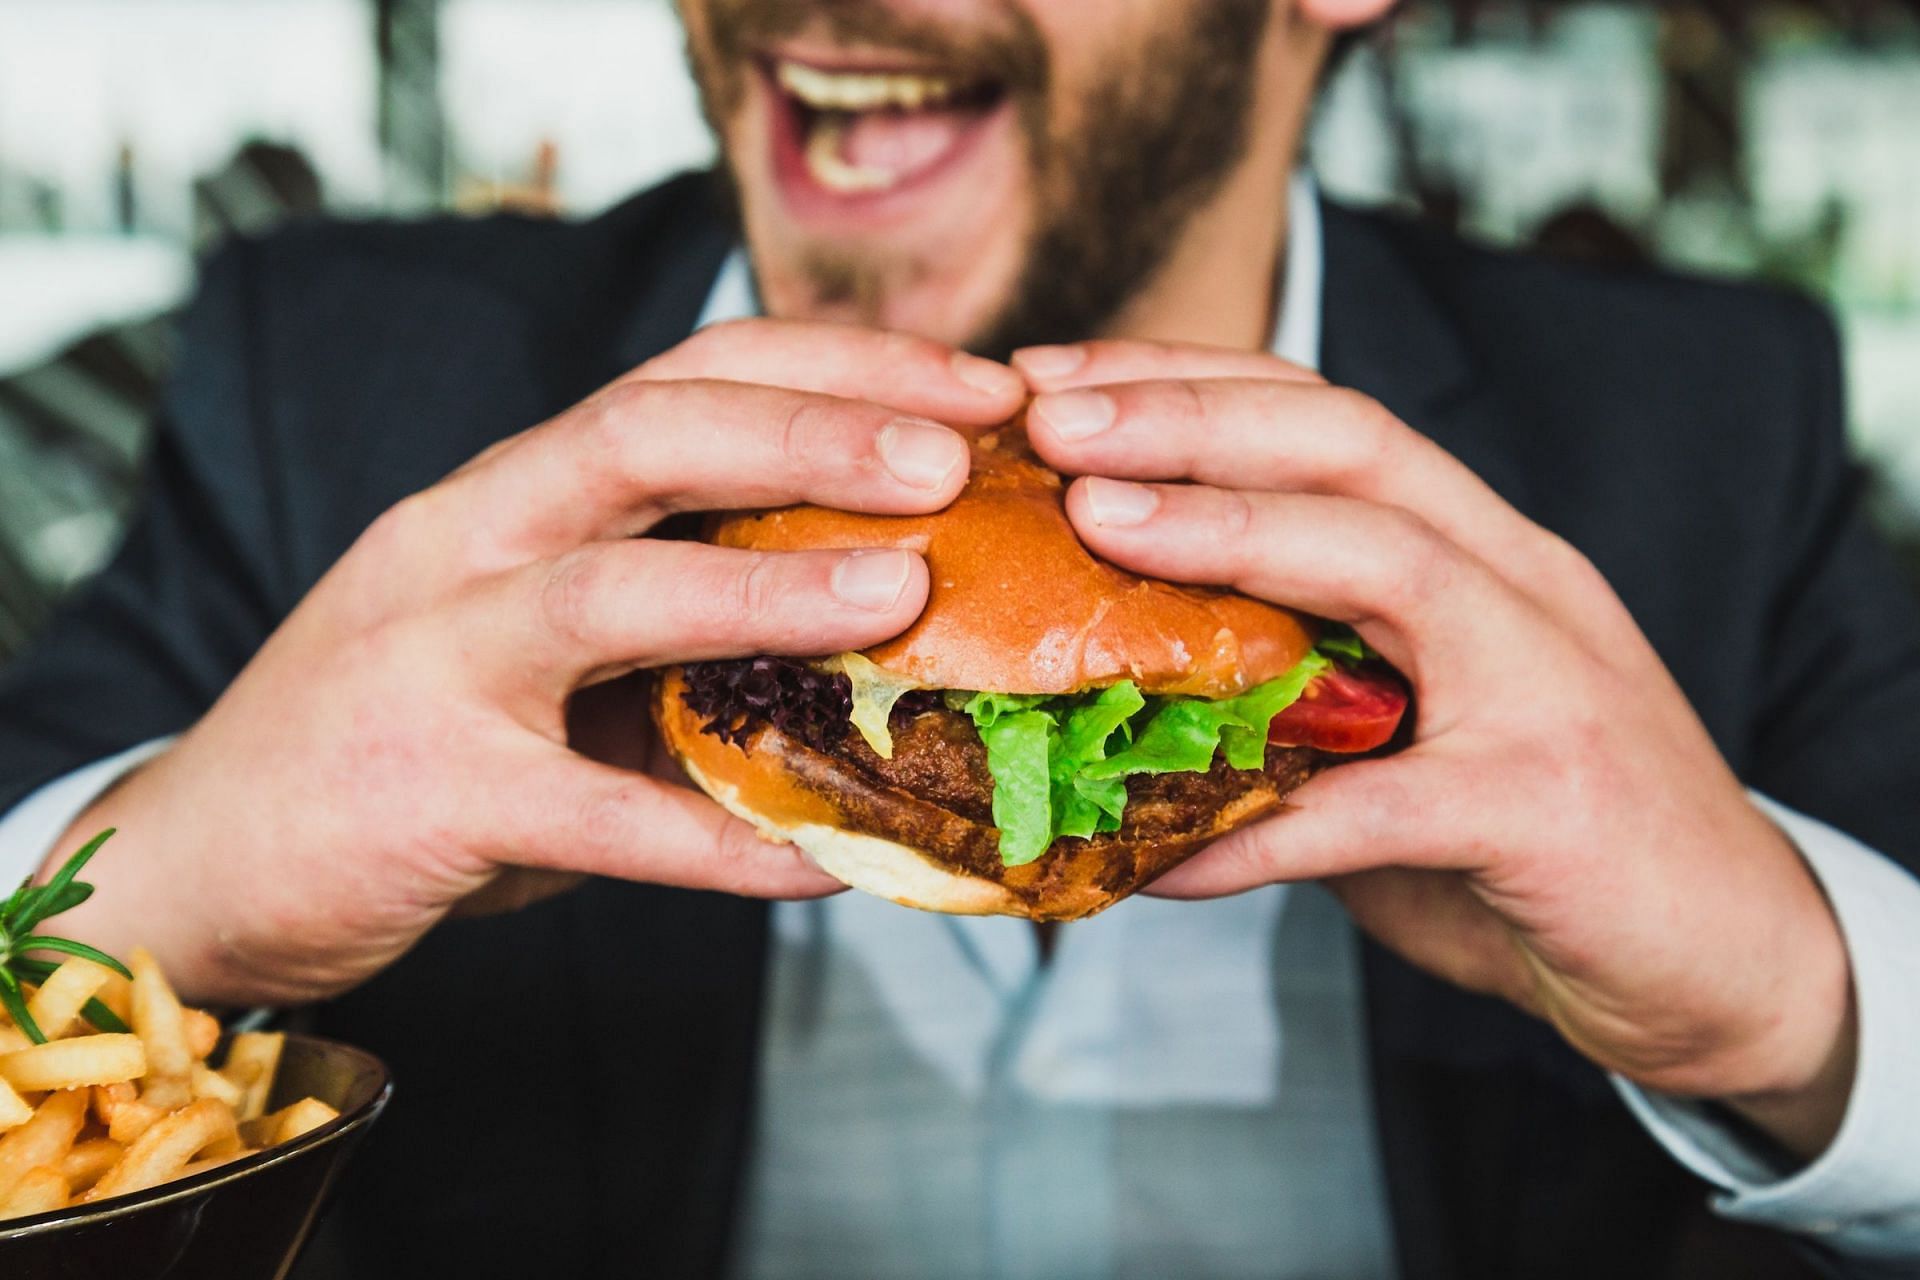 Eating too fast can be risky to your health (Image via Unsplash/Sander Dalhuisen)